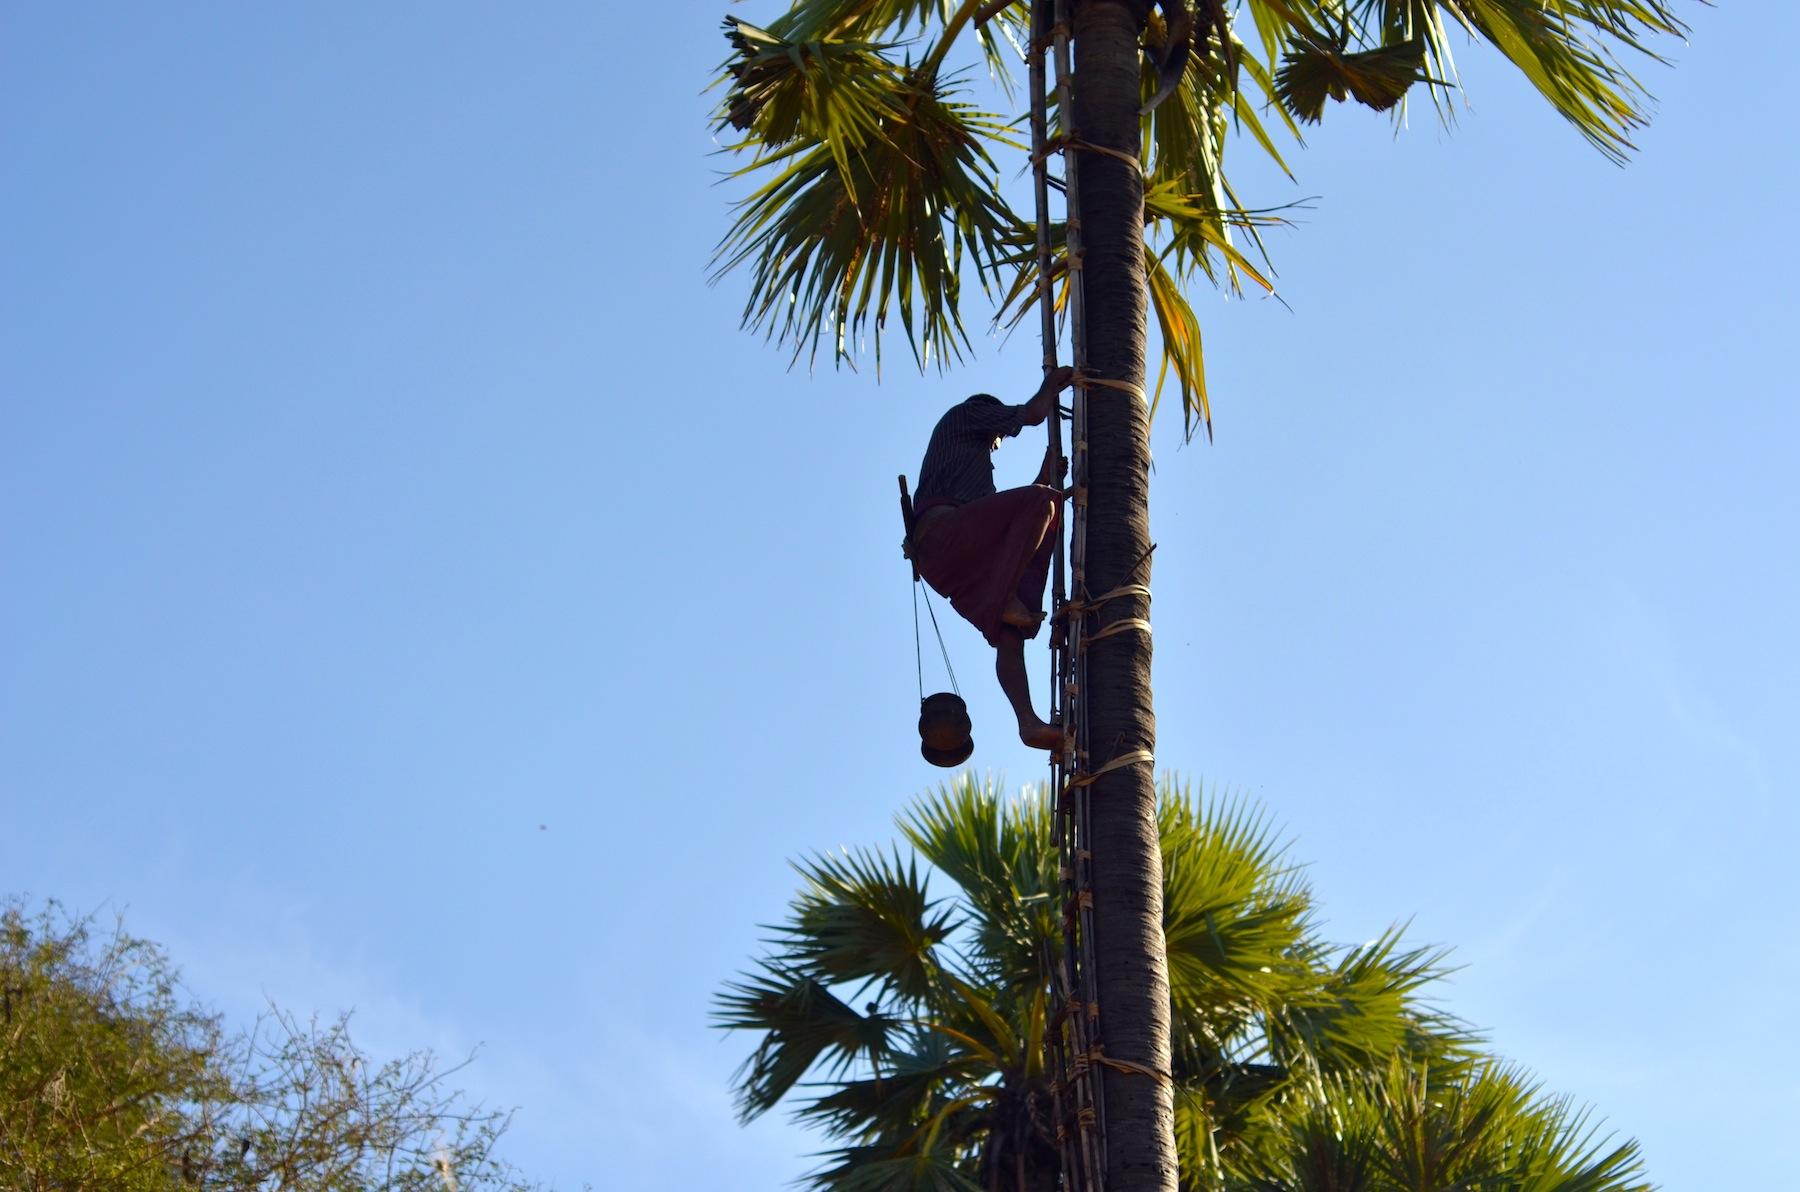 Climb a Palm Tree If You Want to Get Drunk in Myanmar